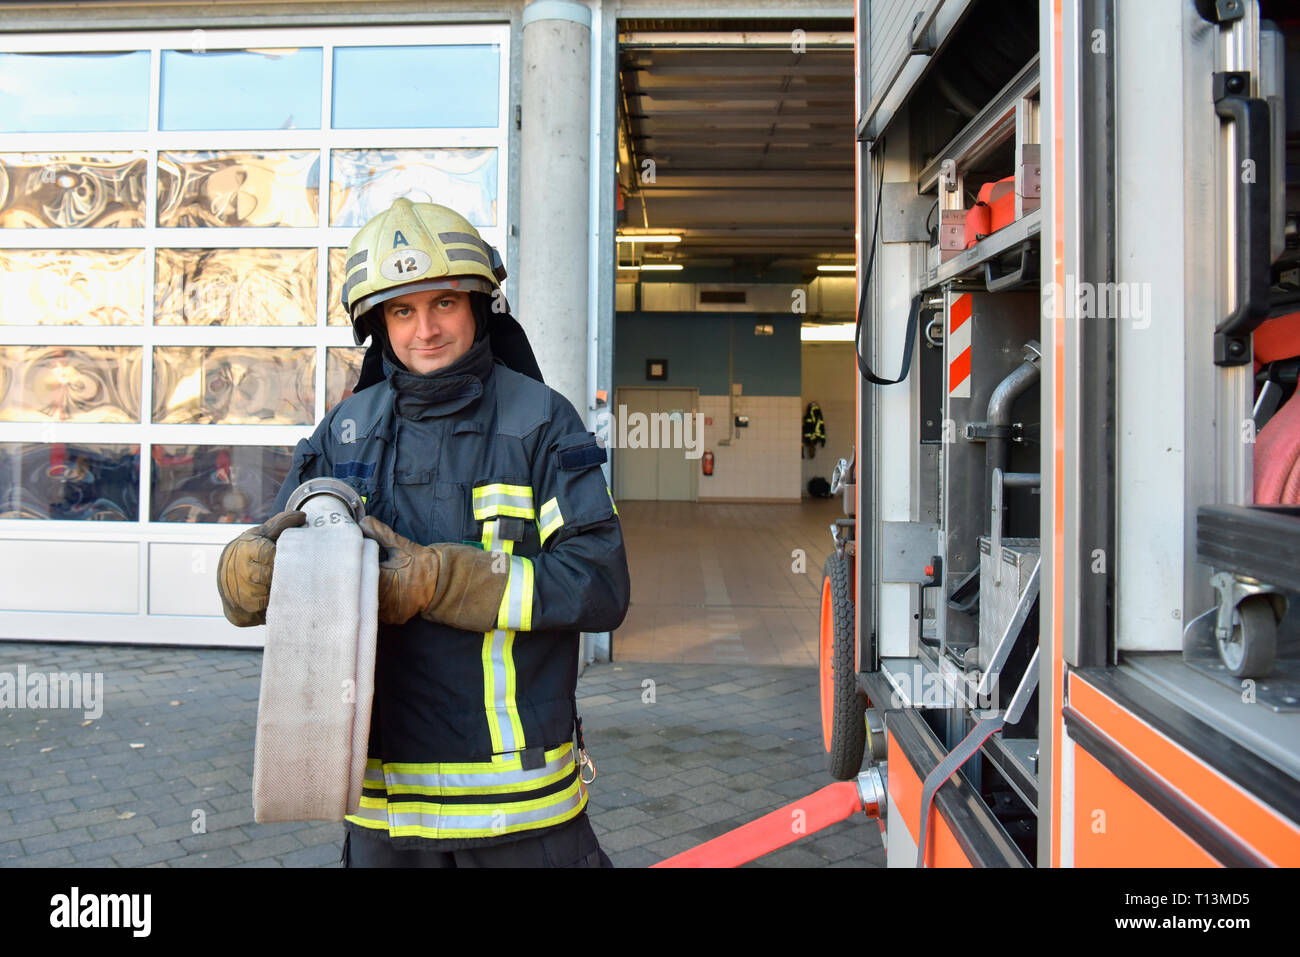 Portrait of firefighter at fire engine holding firehose Stock Photo